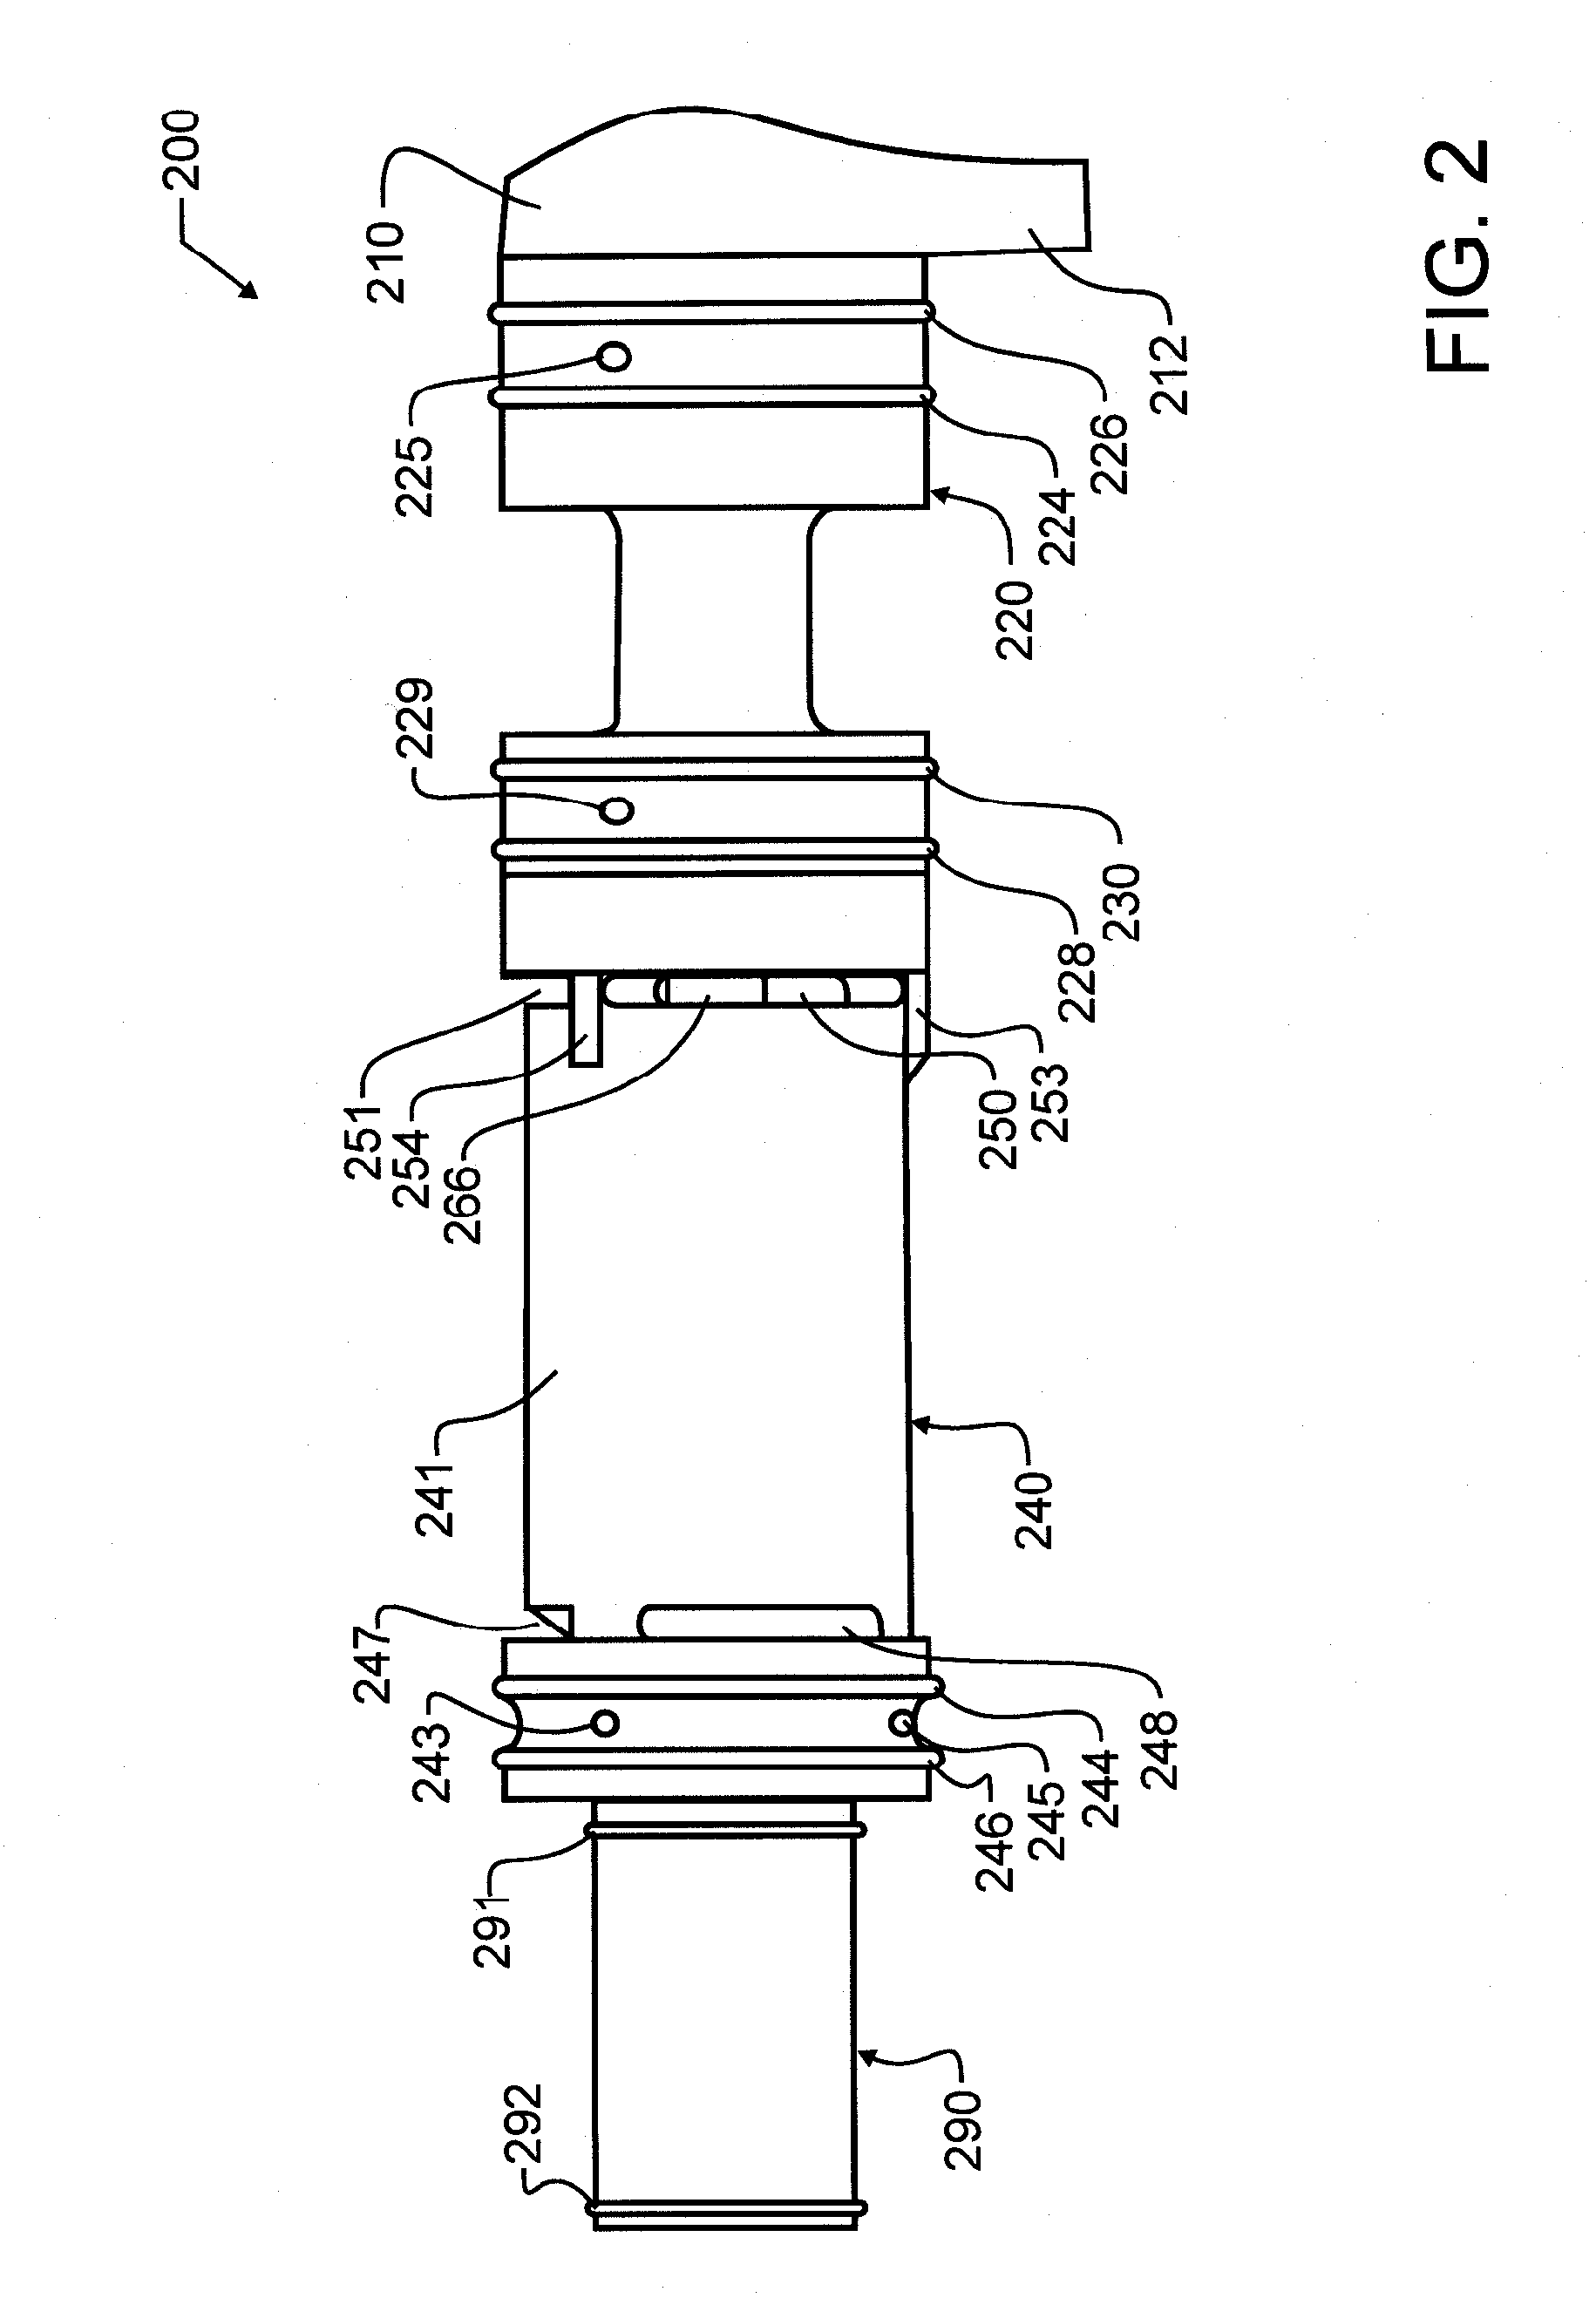 Valve Assembly for Paintball Guns and the Like, and Improved Guns Incorporating the Assembly